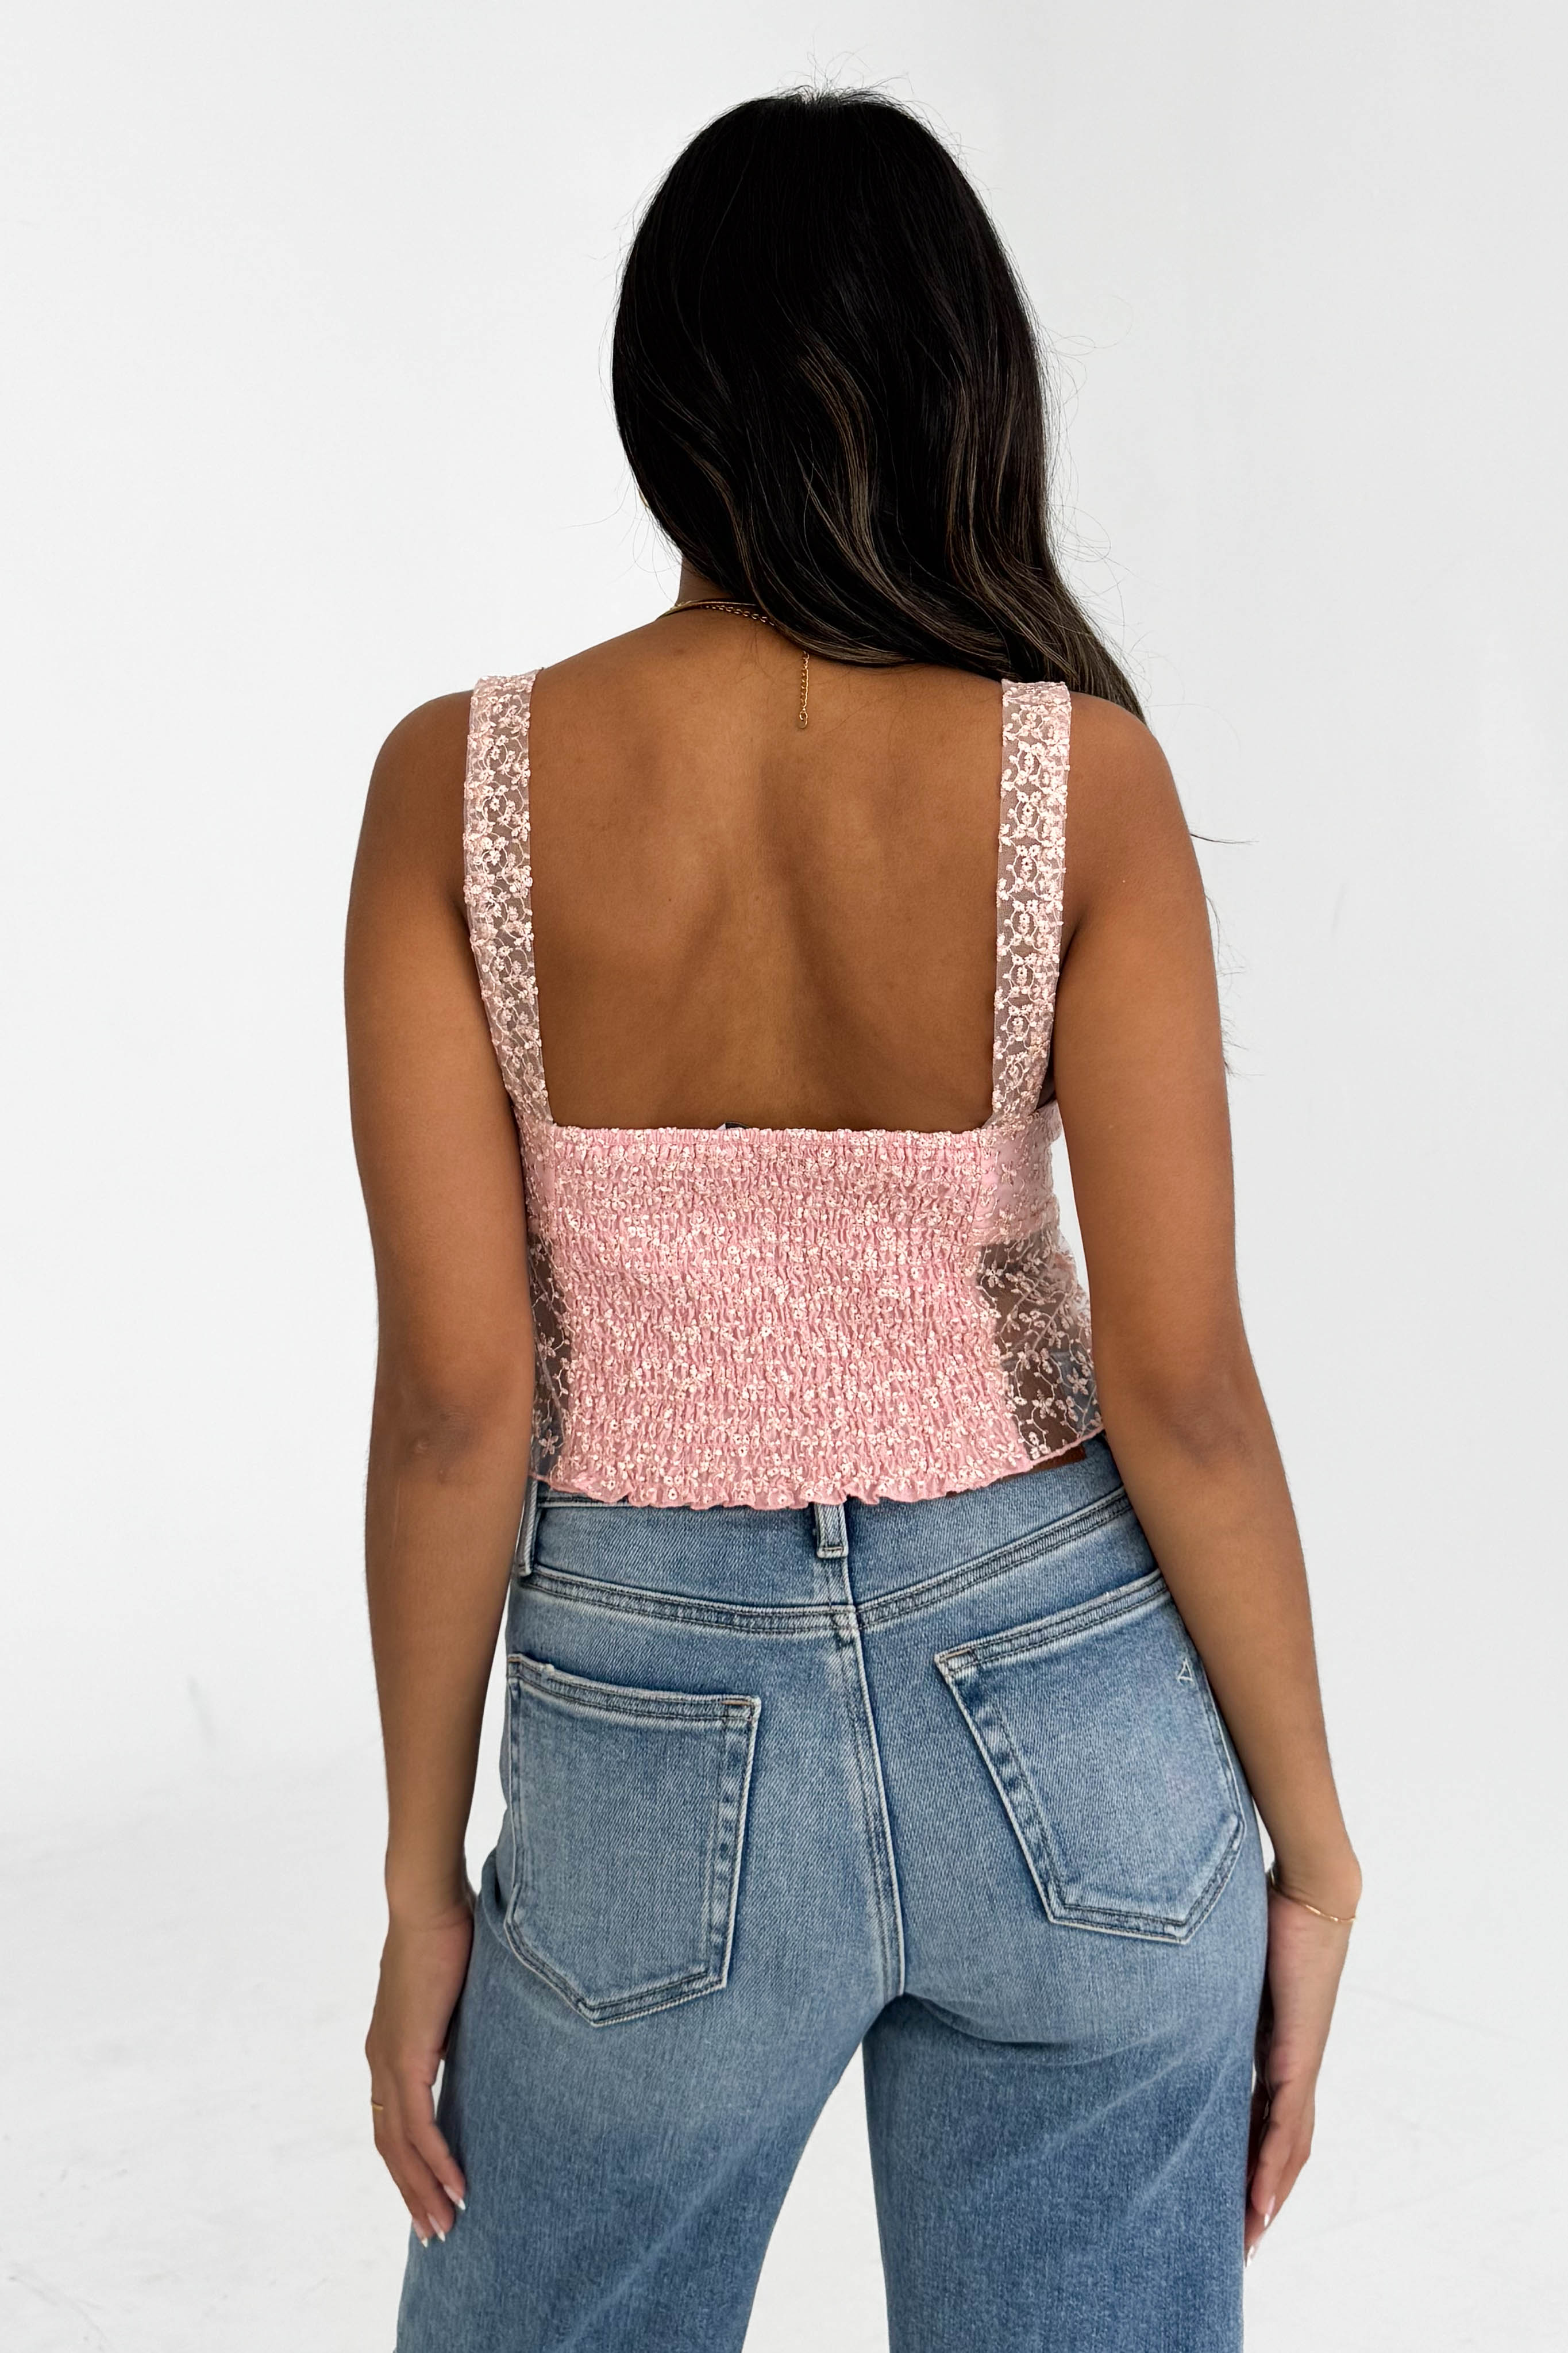 Adore You Top in Blush